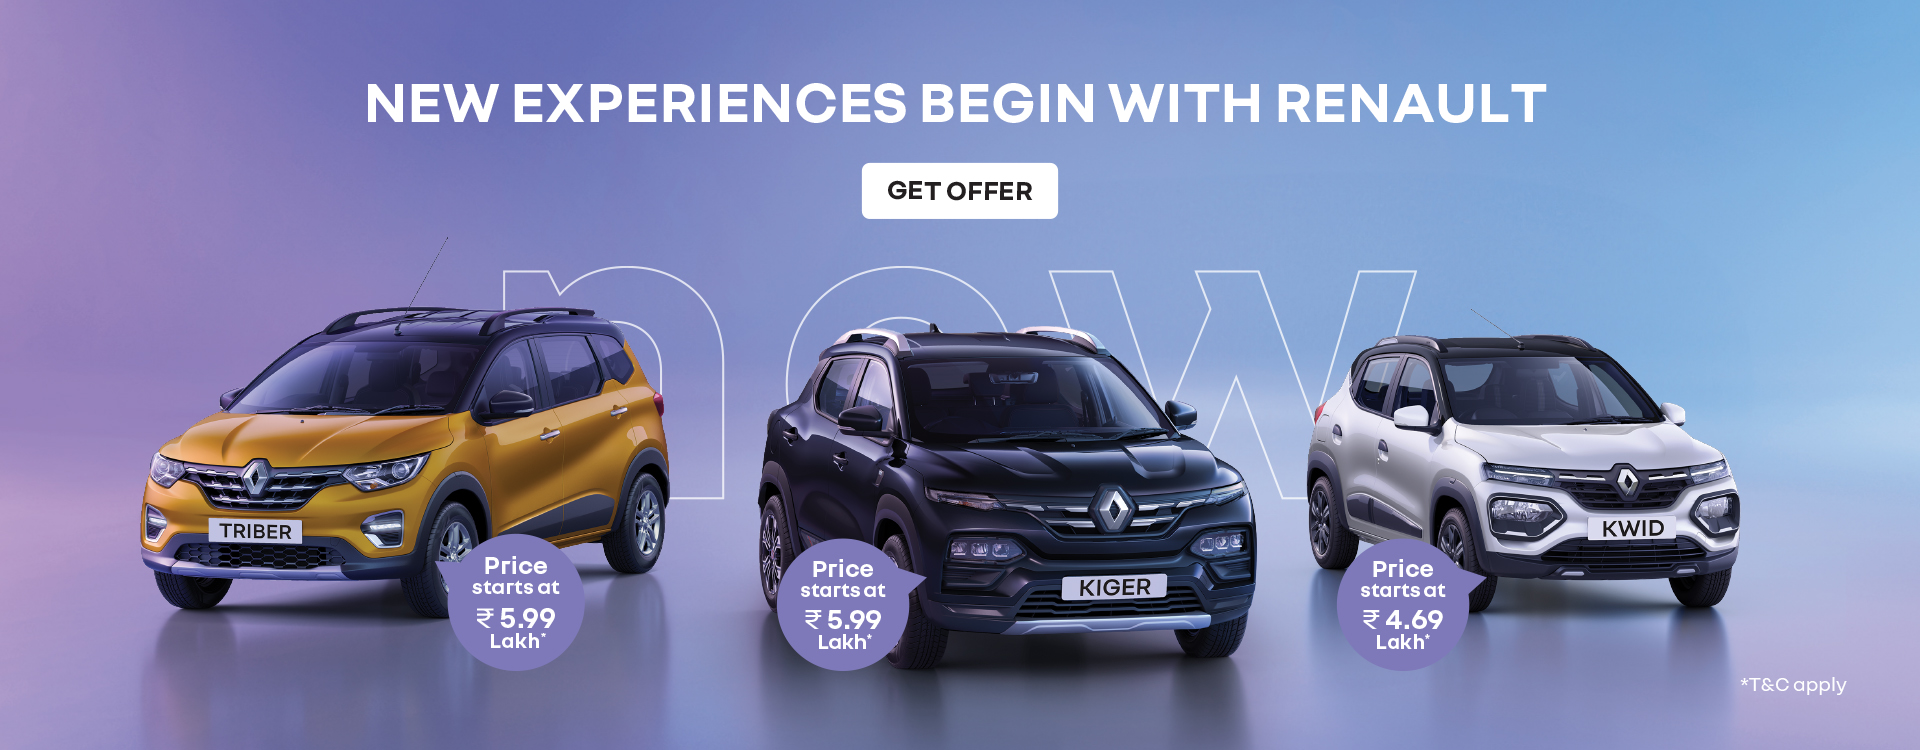 Renault offers